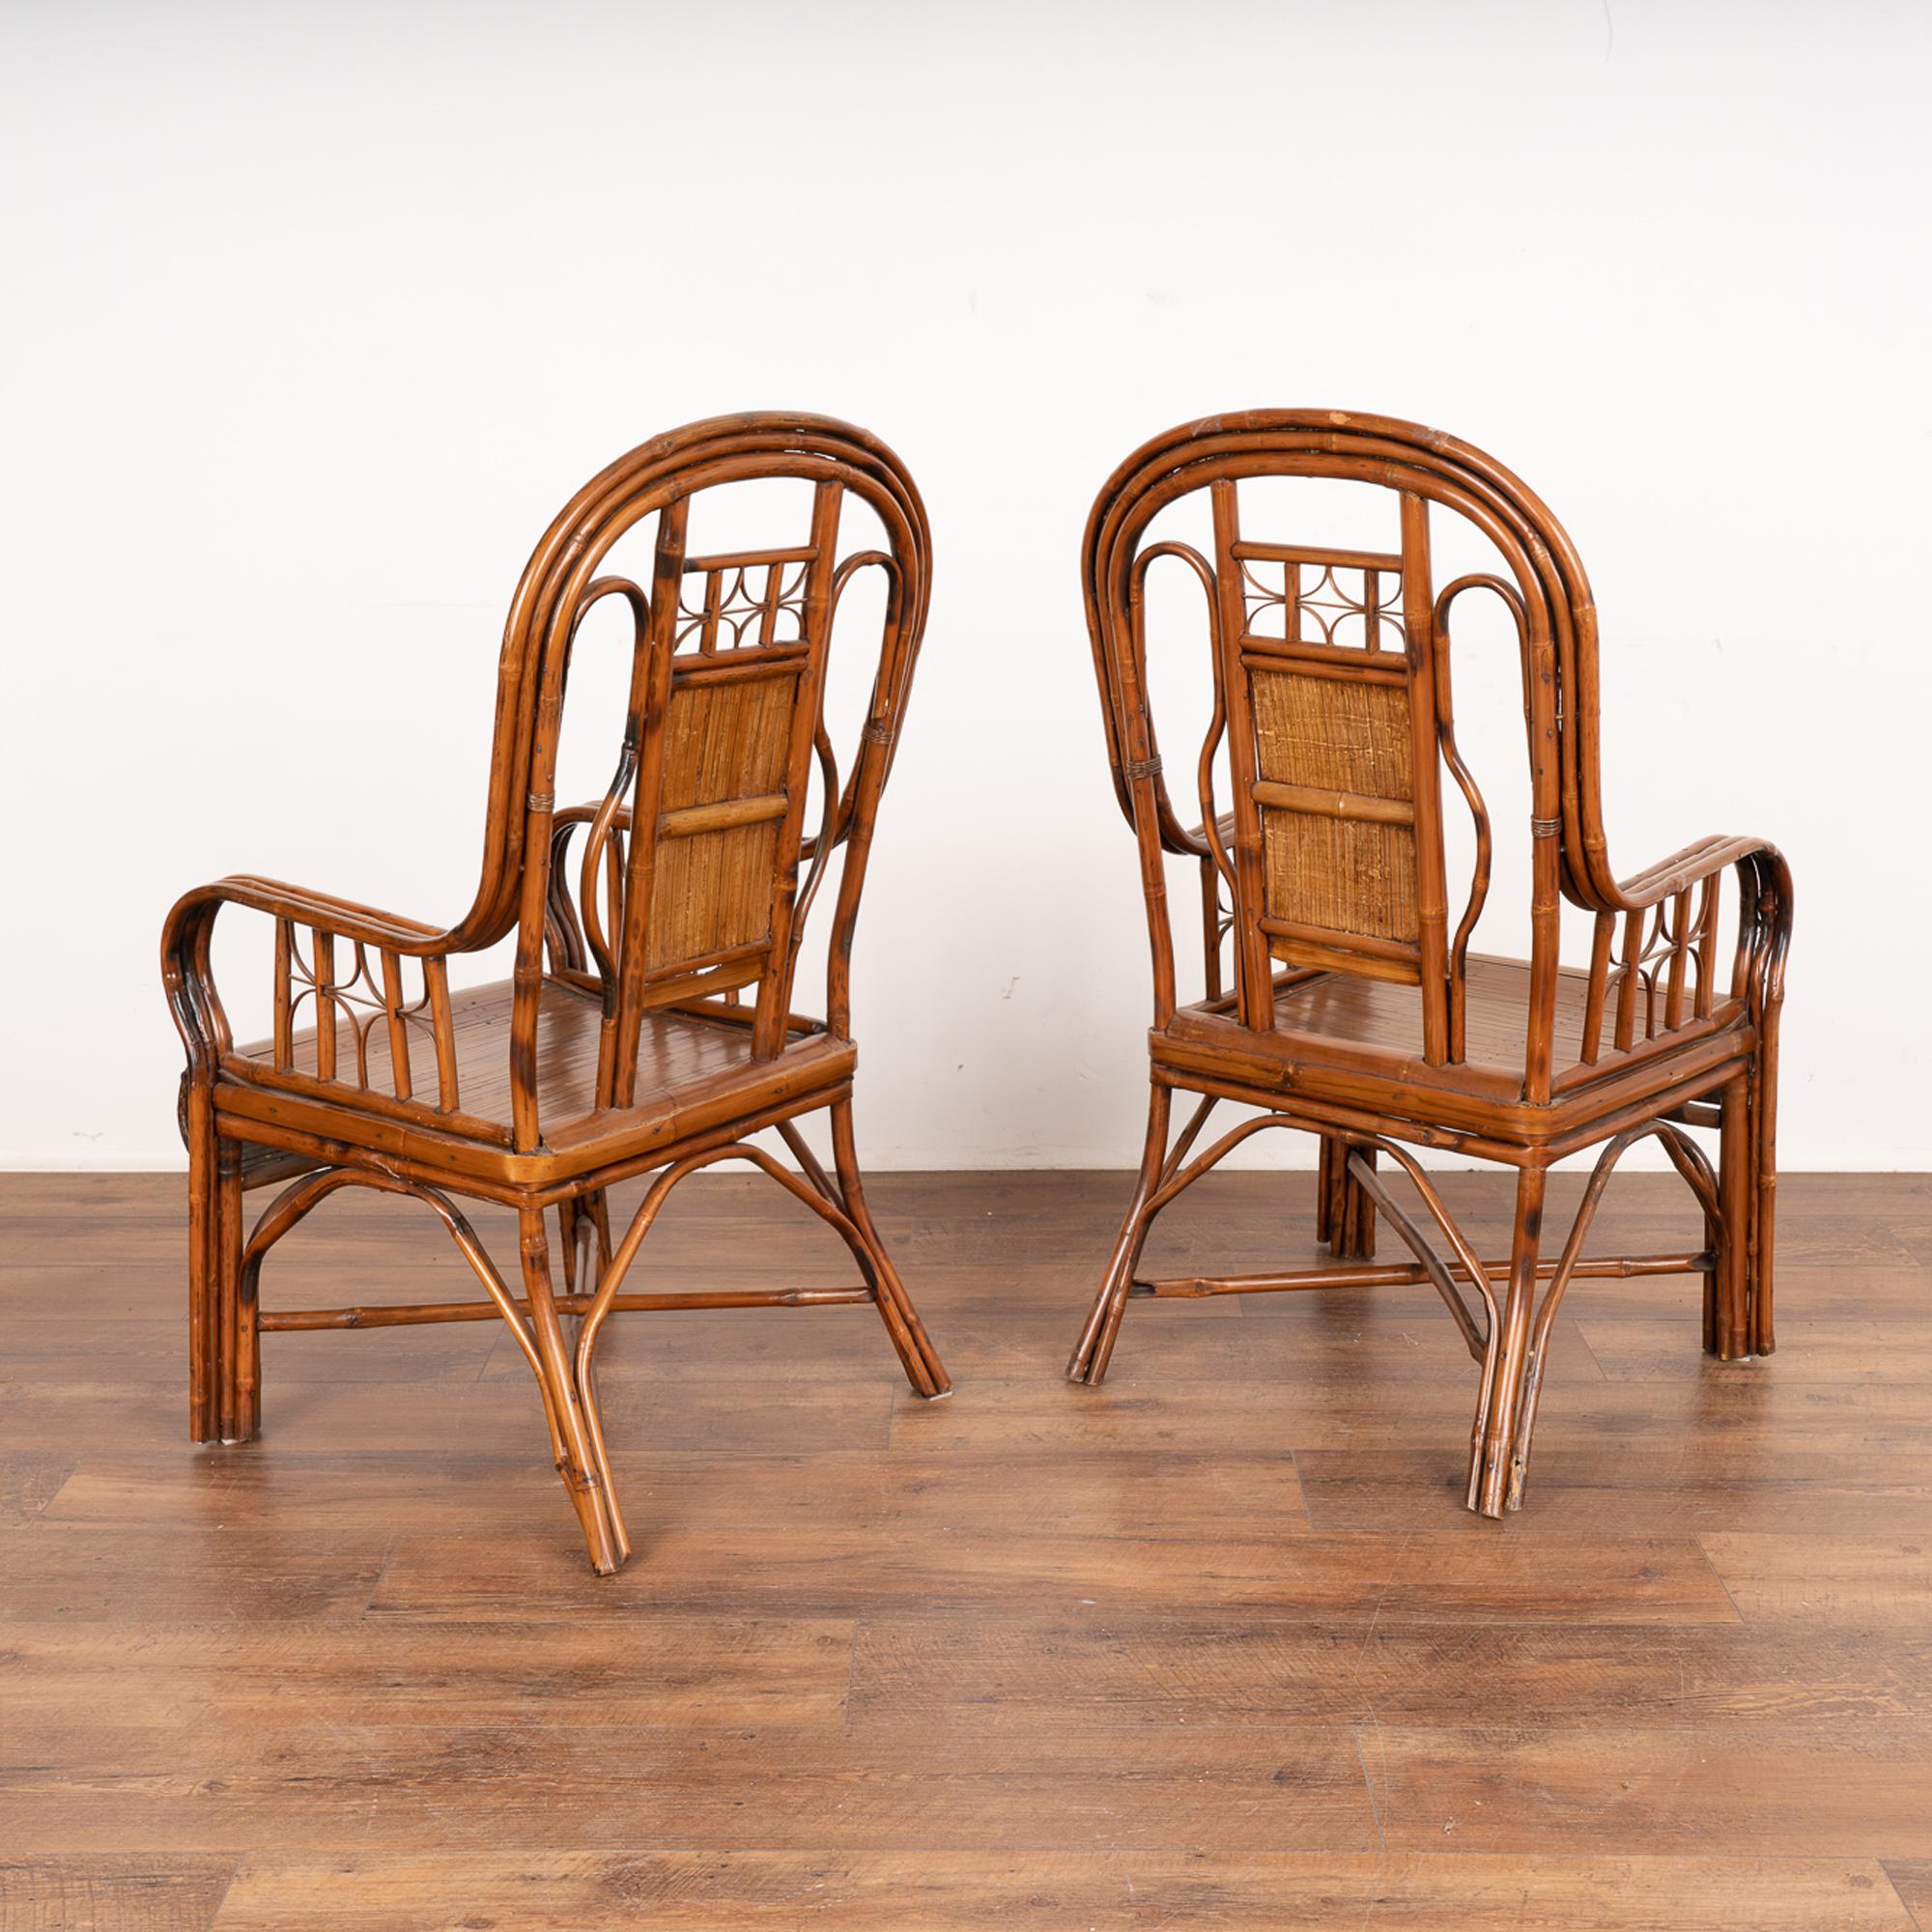 Pair, Bamboo Arm Chairs, China circa 1880 For Sale 5